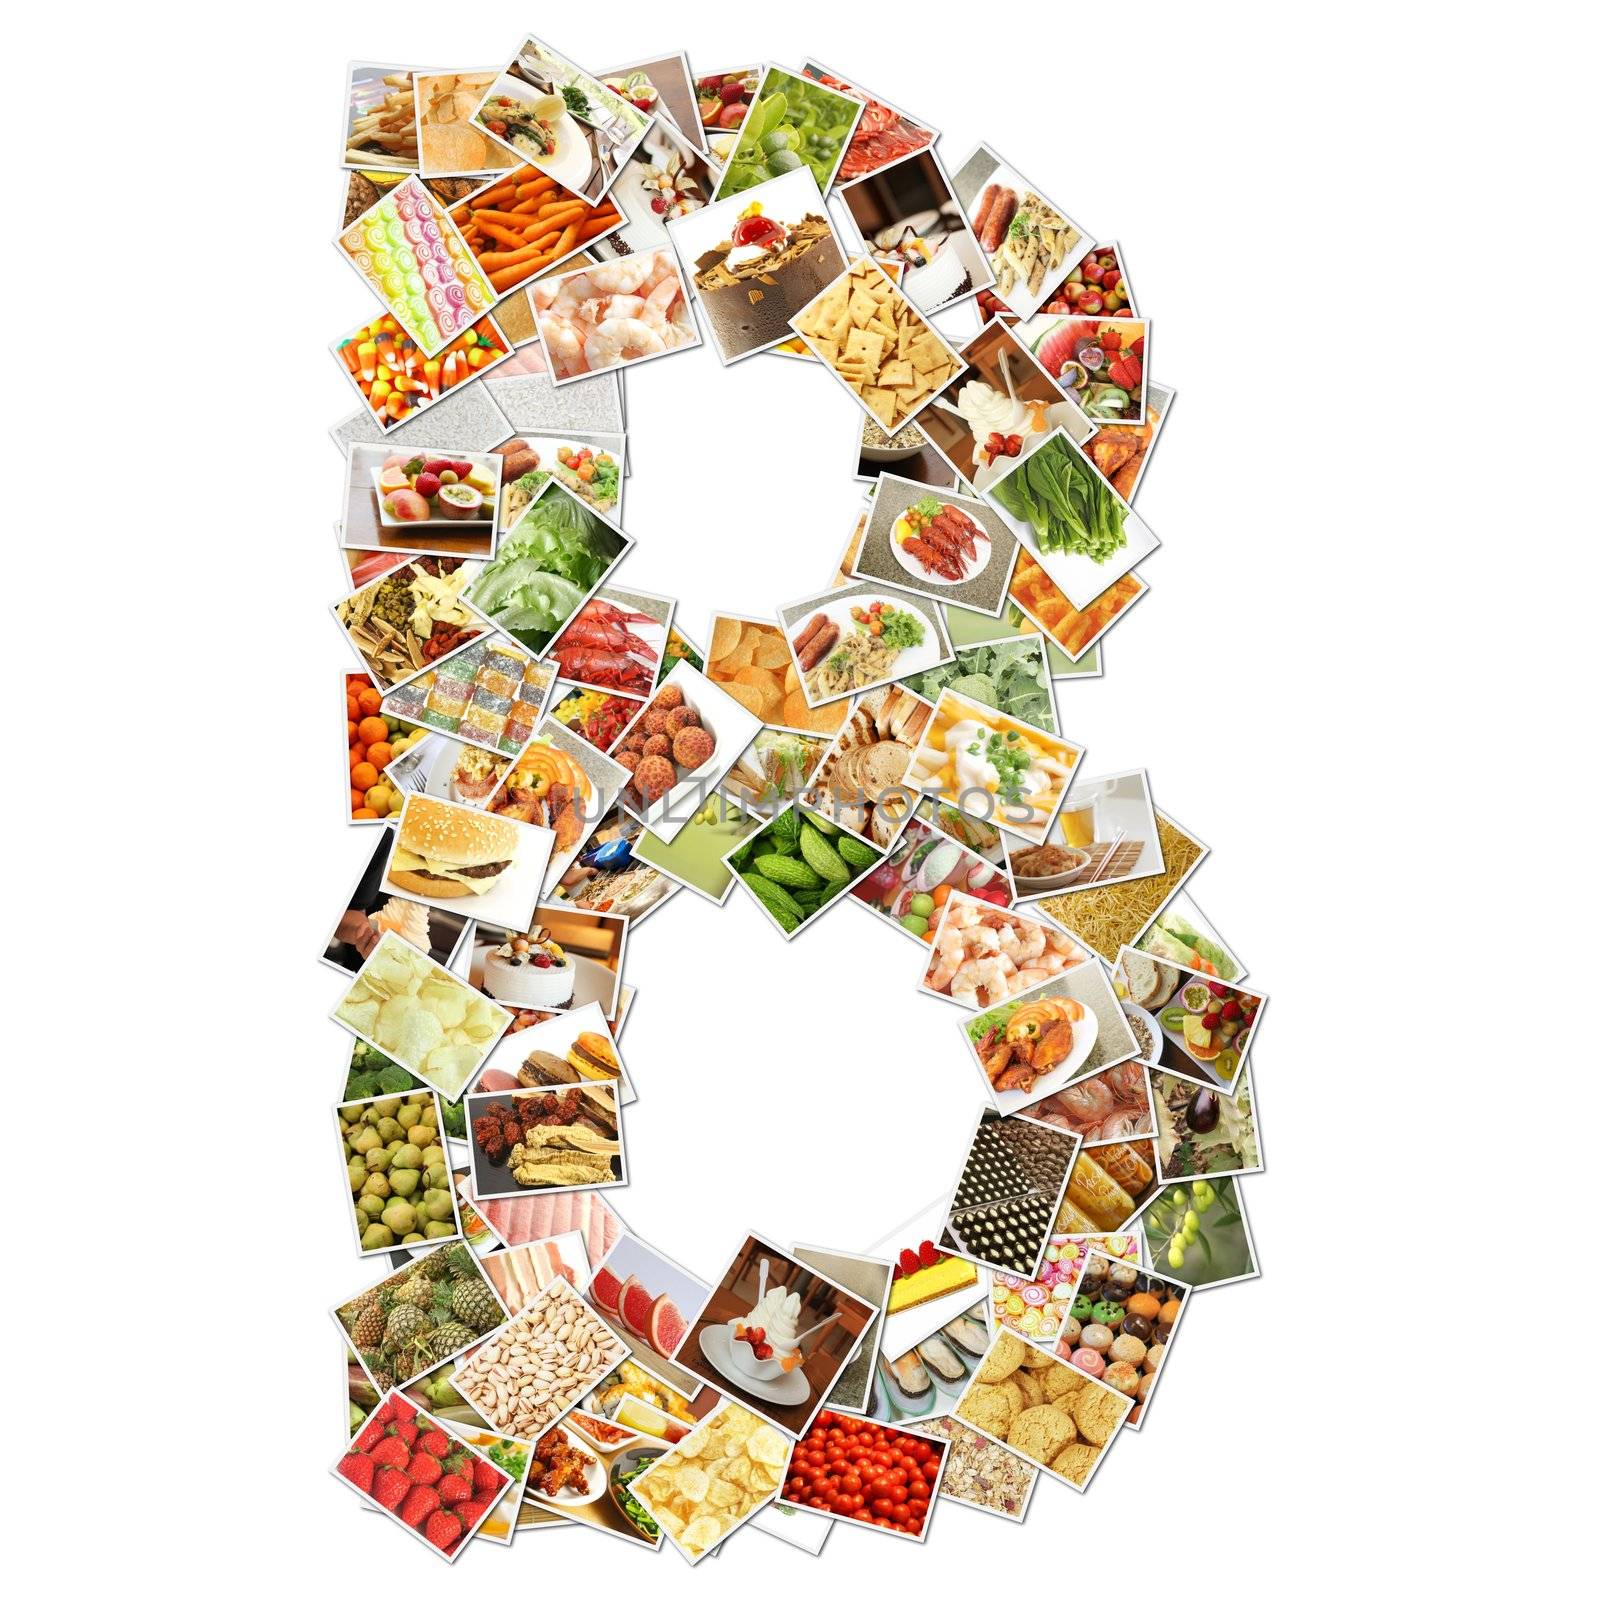 Letter B with Food Collage Concept Art